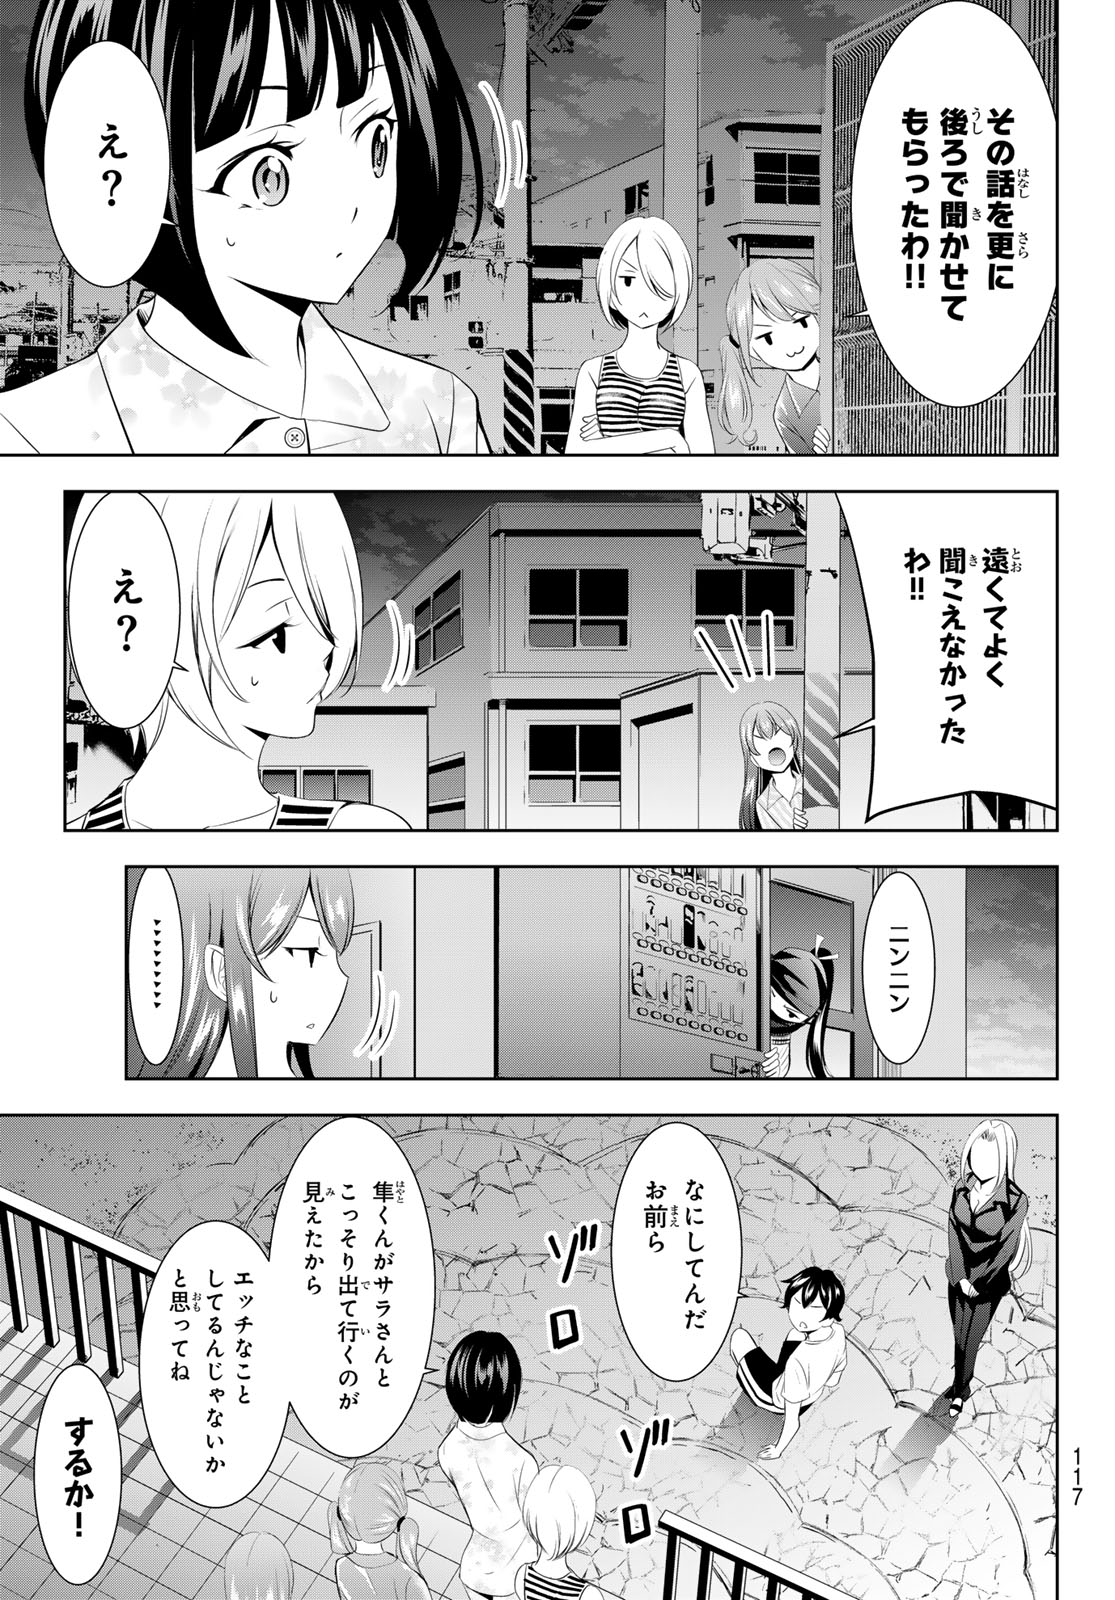 Megami no Cafe Terace - Chapter 144 - Page 17